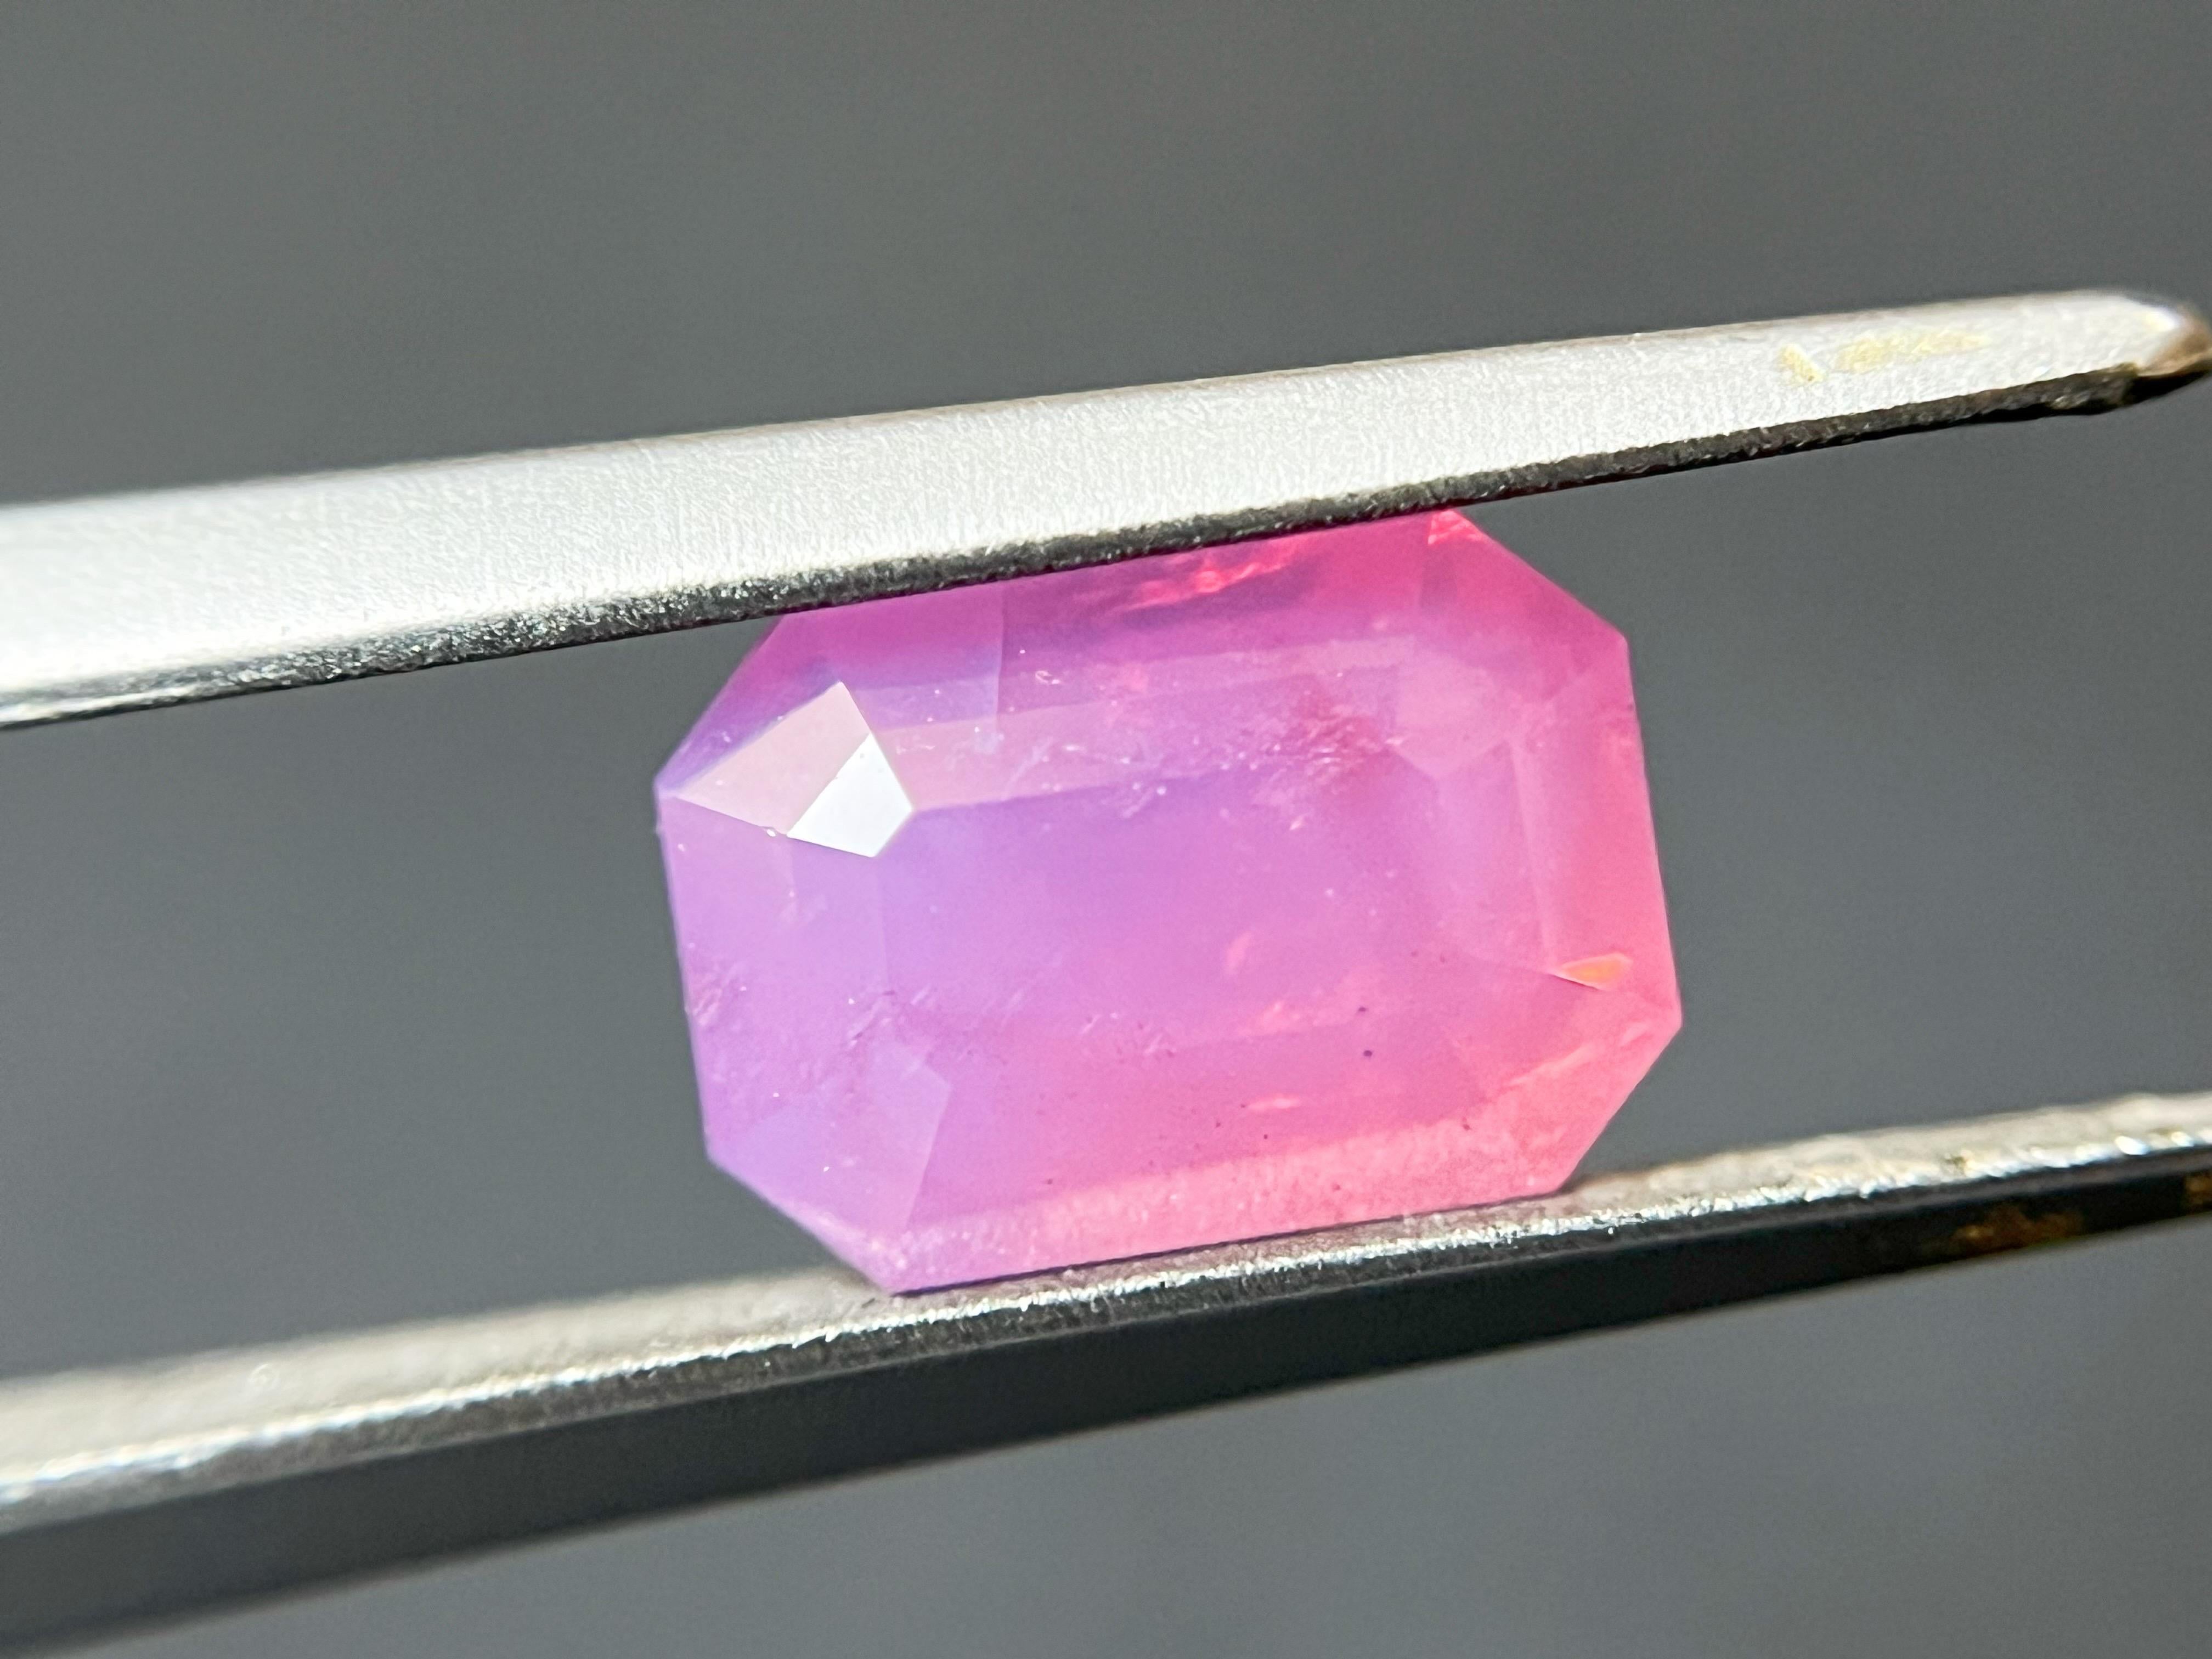 Introducing a rare and exquisite piece of jewelry - the Mahenge spinel, with a milky neon pink color and orange fire that is sure to leave a lasting impression. This gemstone is a true rarity, with a vibrant and intense hue that is seldom seen in